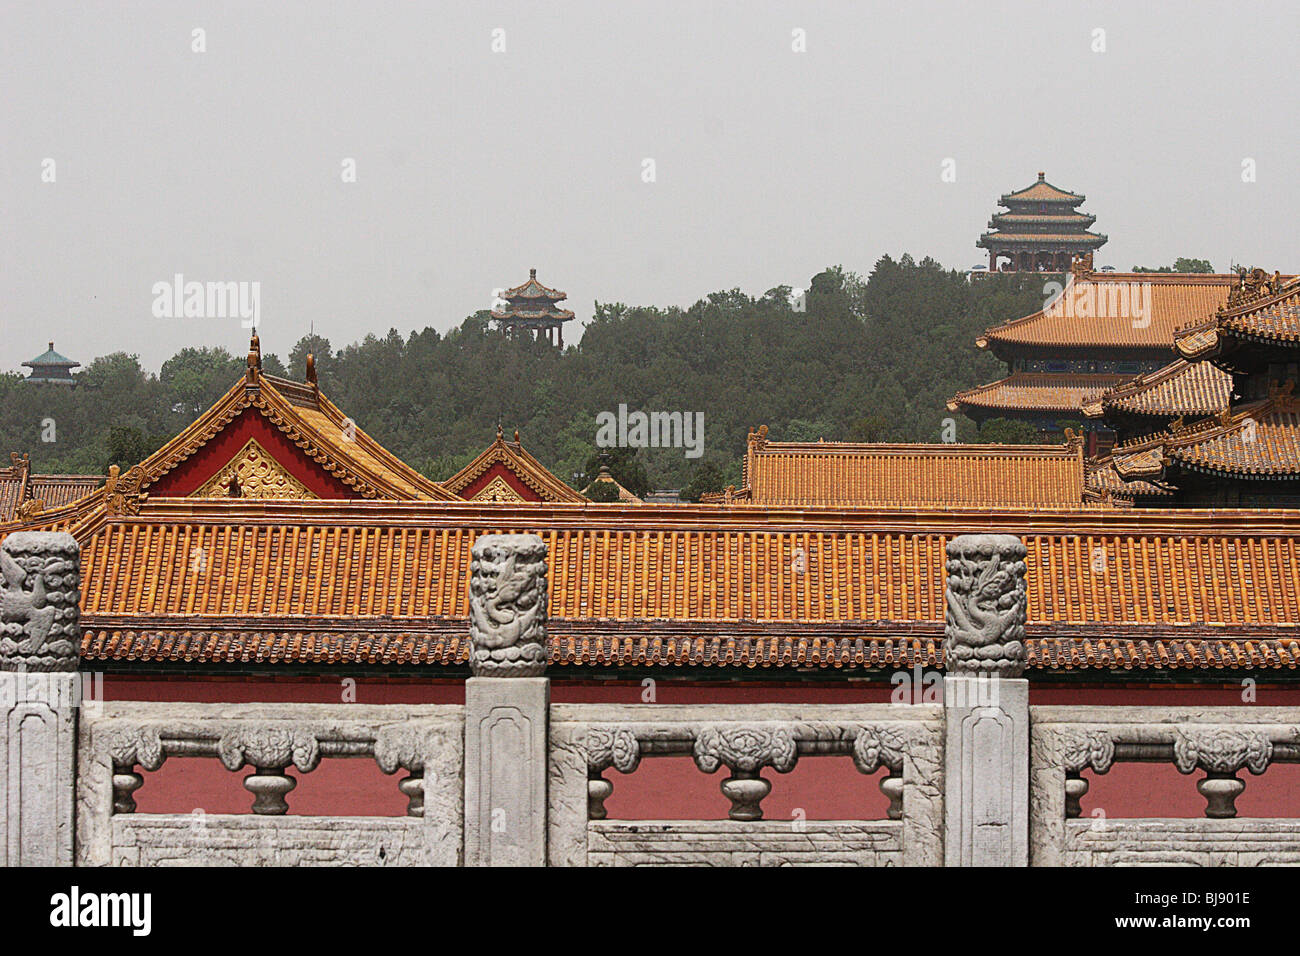 Architecture of the Forbidden City Stock Photo